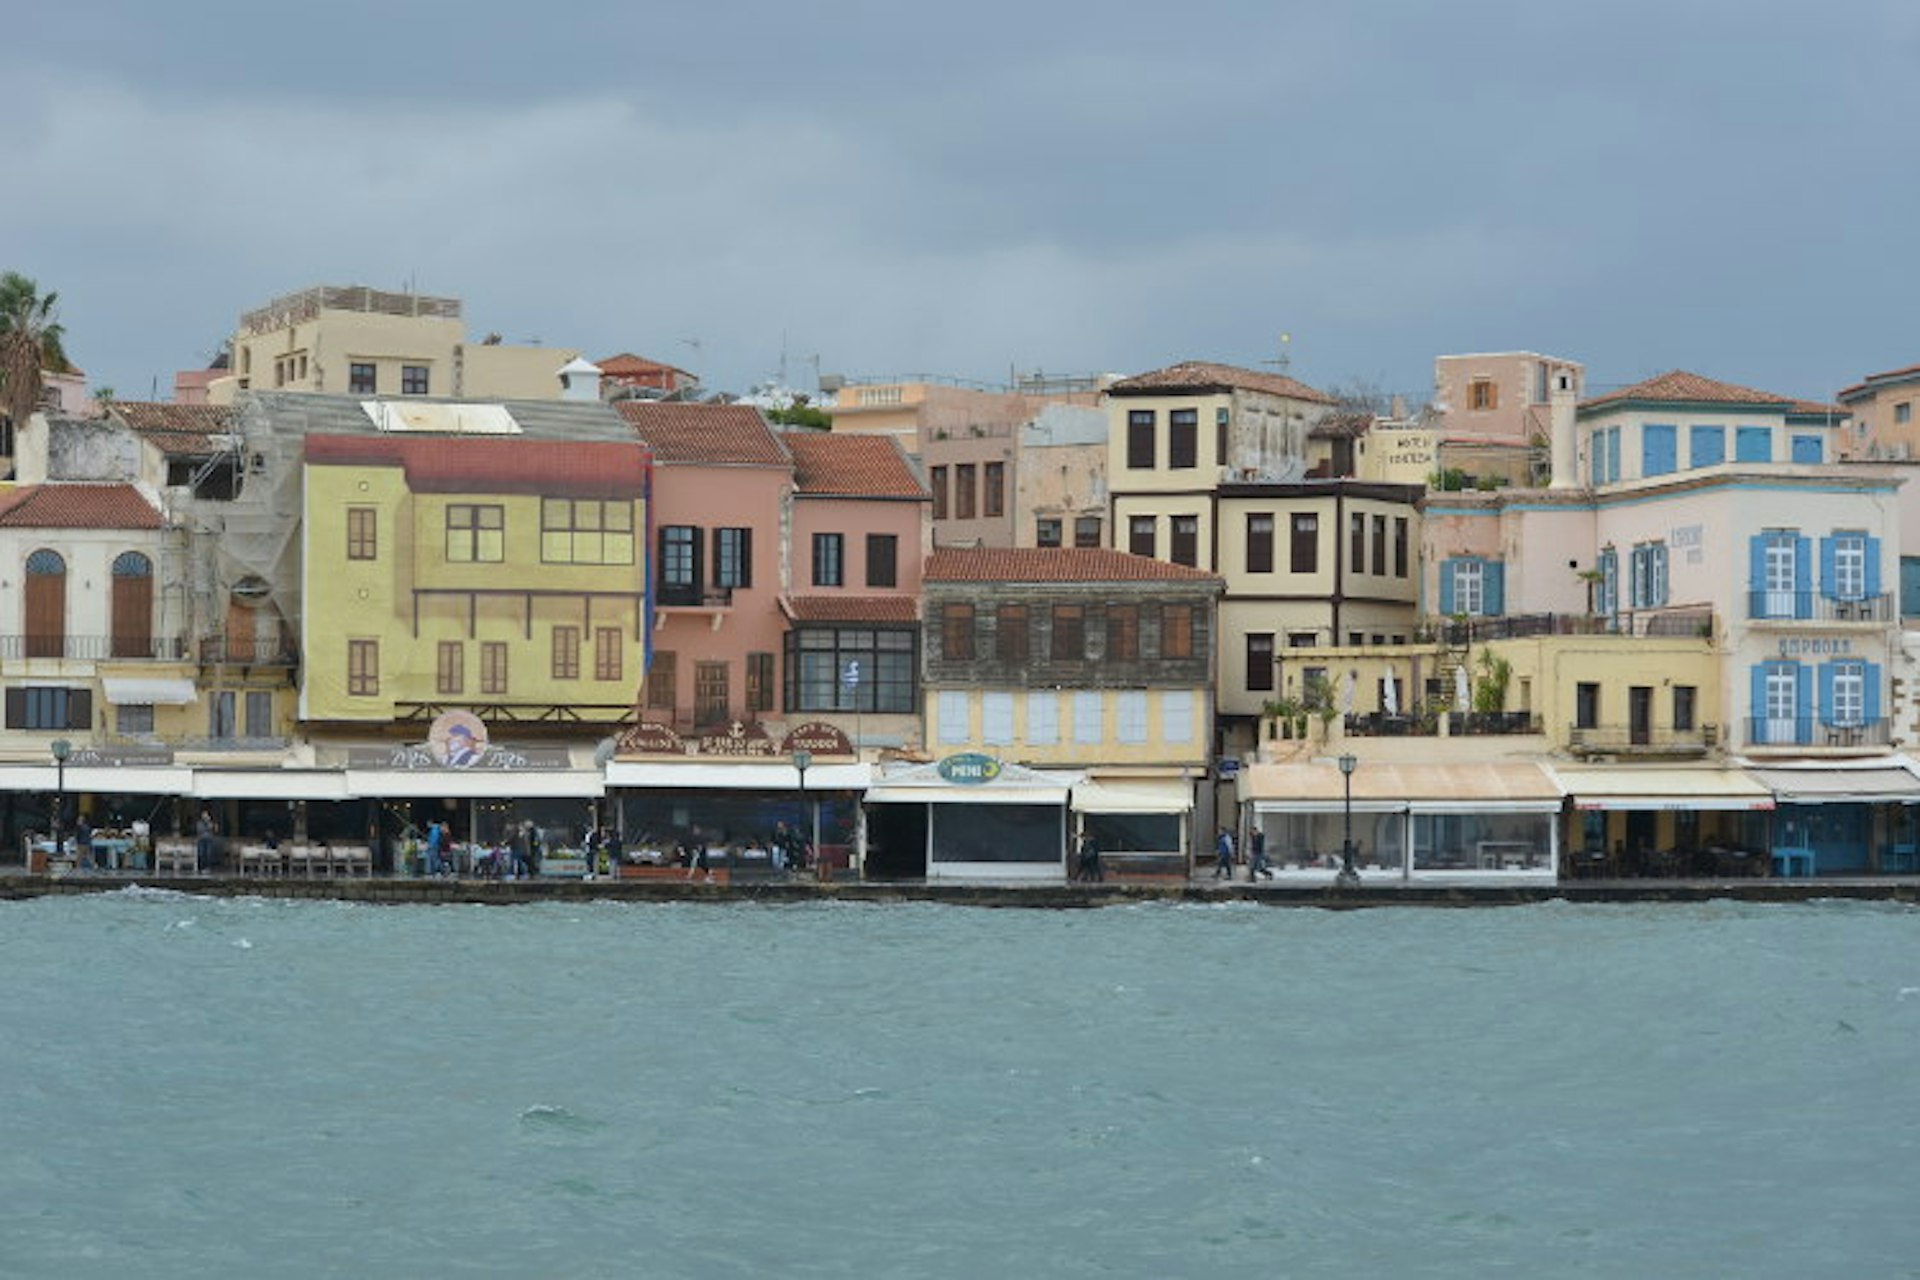 Grey-blue water butts up to the port, which is lined with pastel-coloured buildings